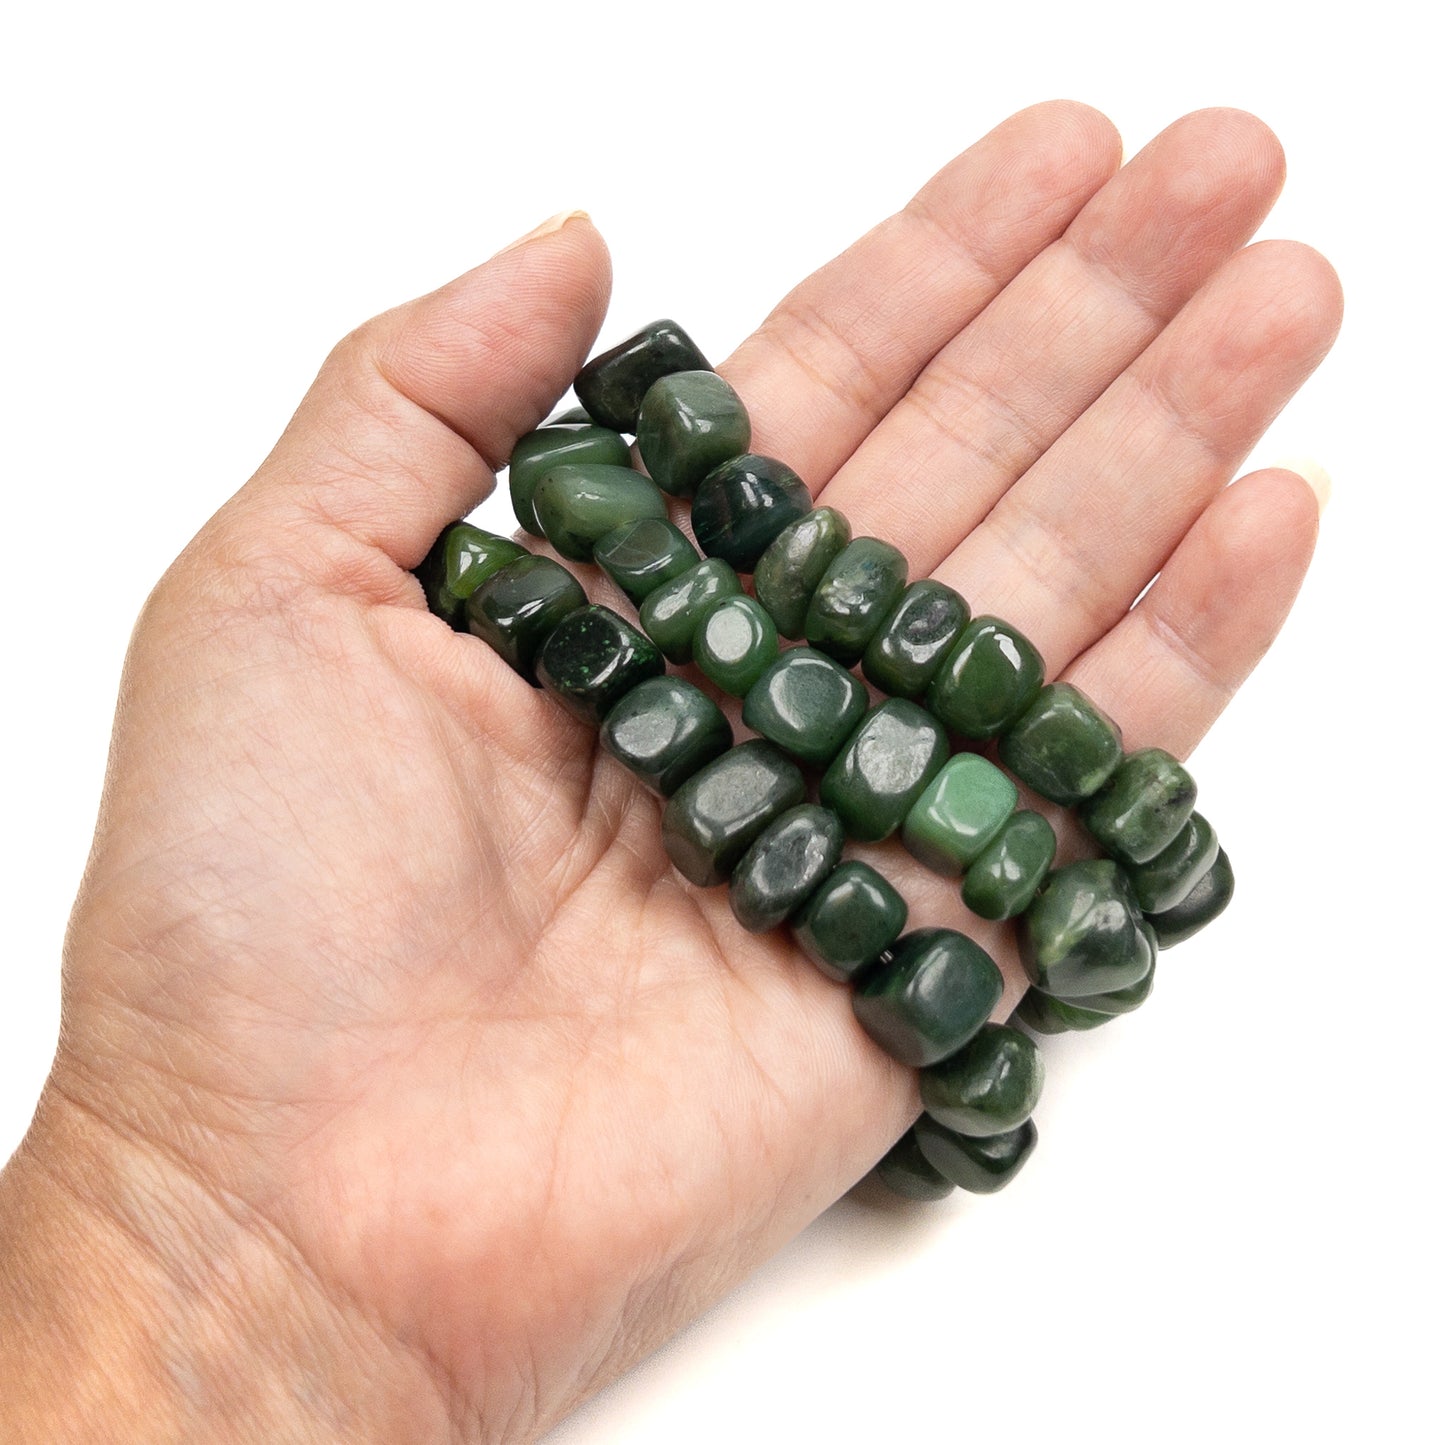 Canadian Jade Large Cubic Nugget Bead Stretchy Cord Bracelet